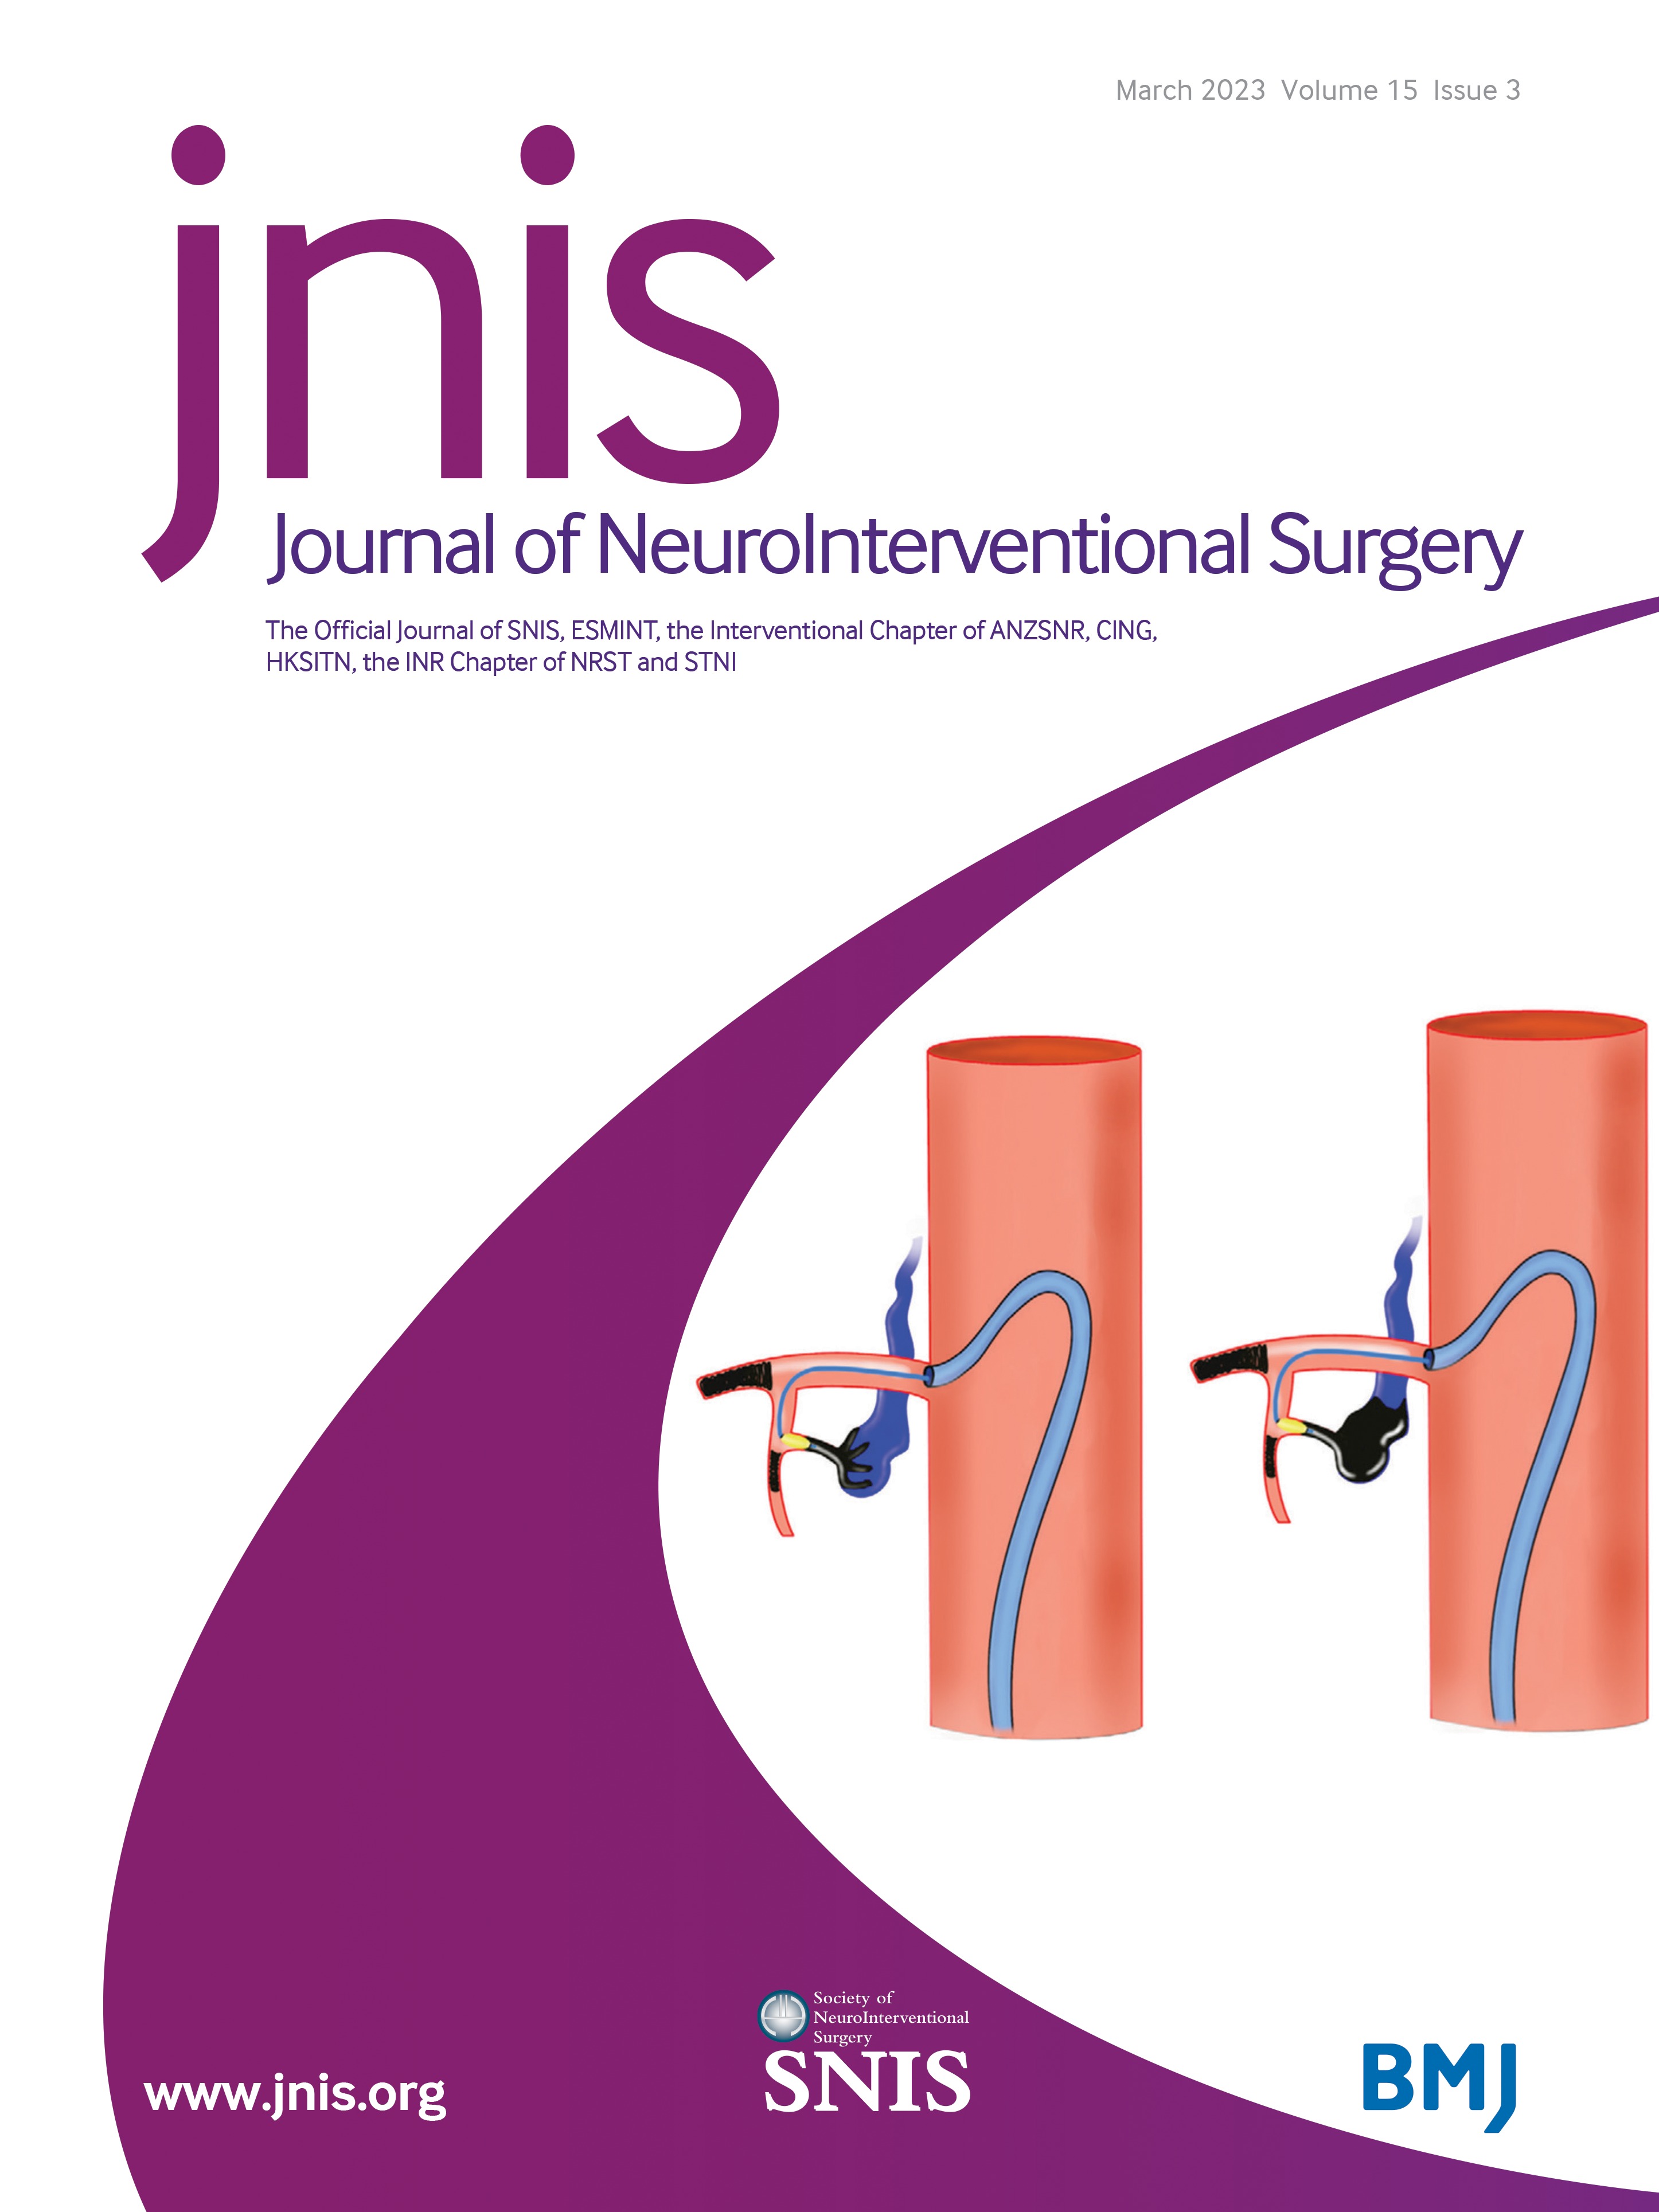 Higher Hospital Frailty Risk Score is associated with increased complications and healthcare resource utilization after endovascular treatment of ruptured intracranial aneurysms